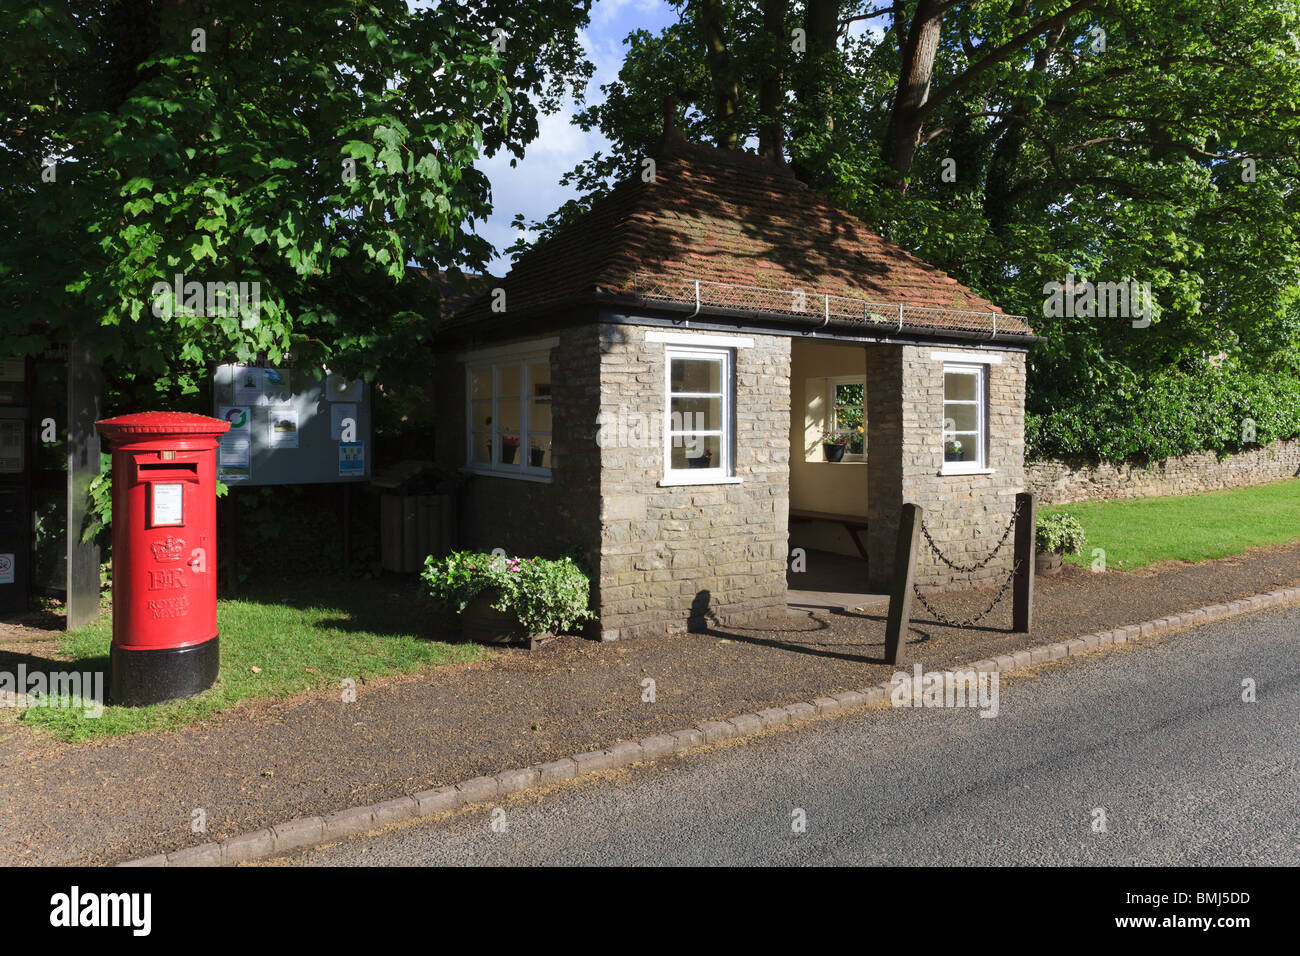 Bus shelter in the village of Weston Underwood, complete with potted plants and Post Box, Buckinghamshire, UK Stock Photo